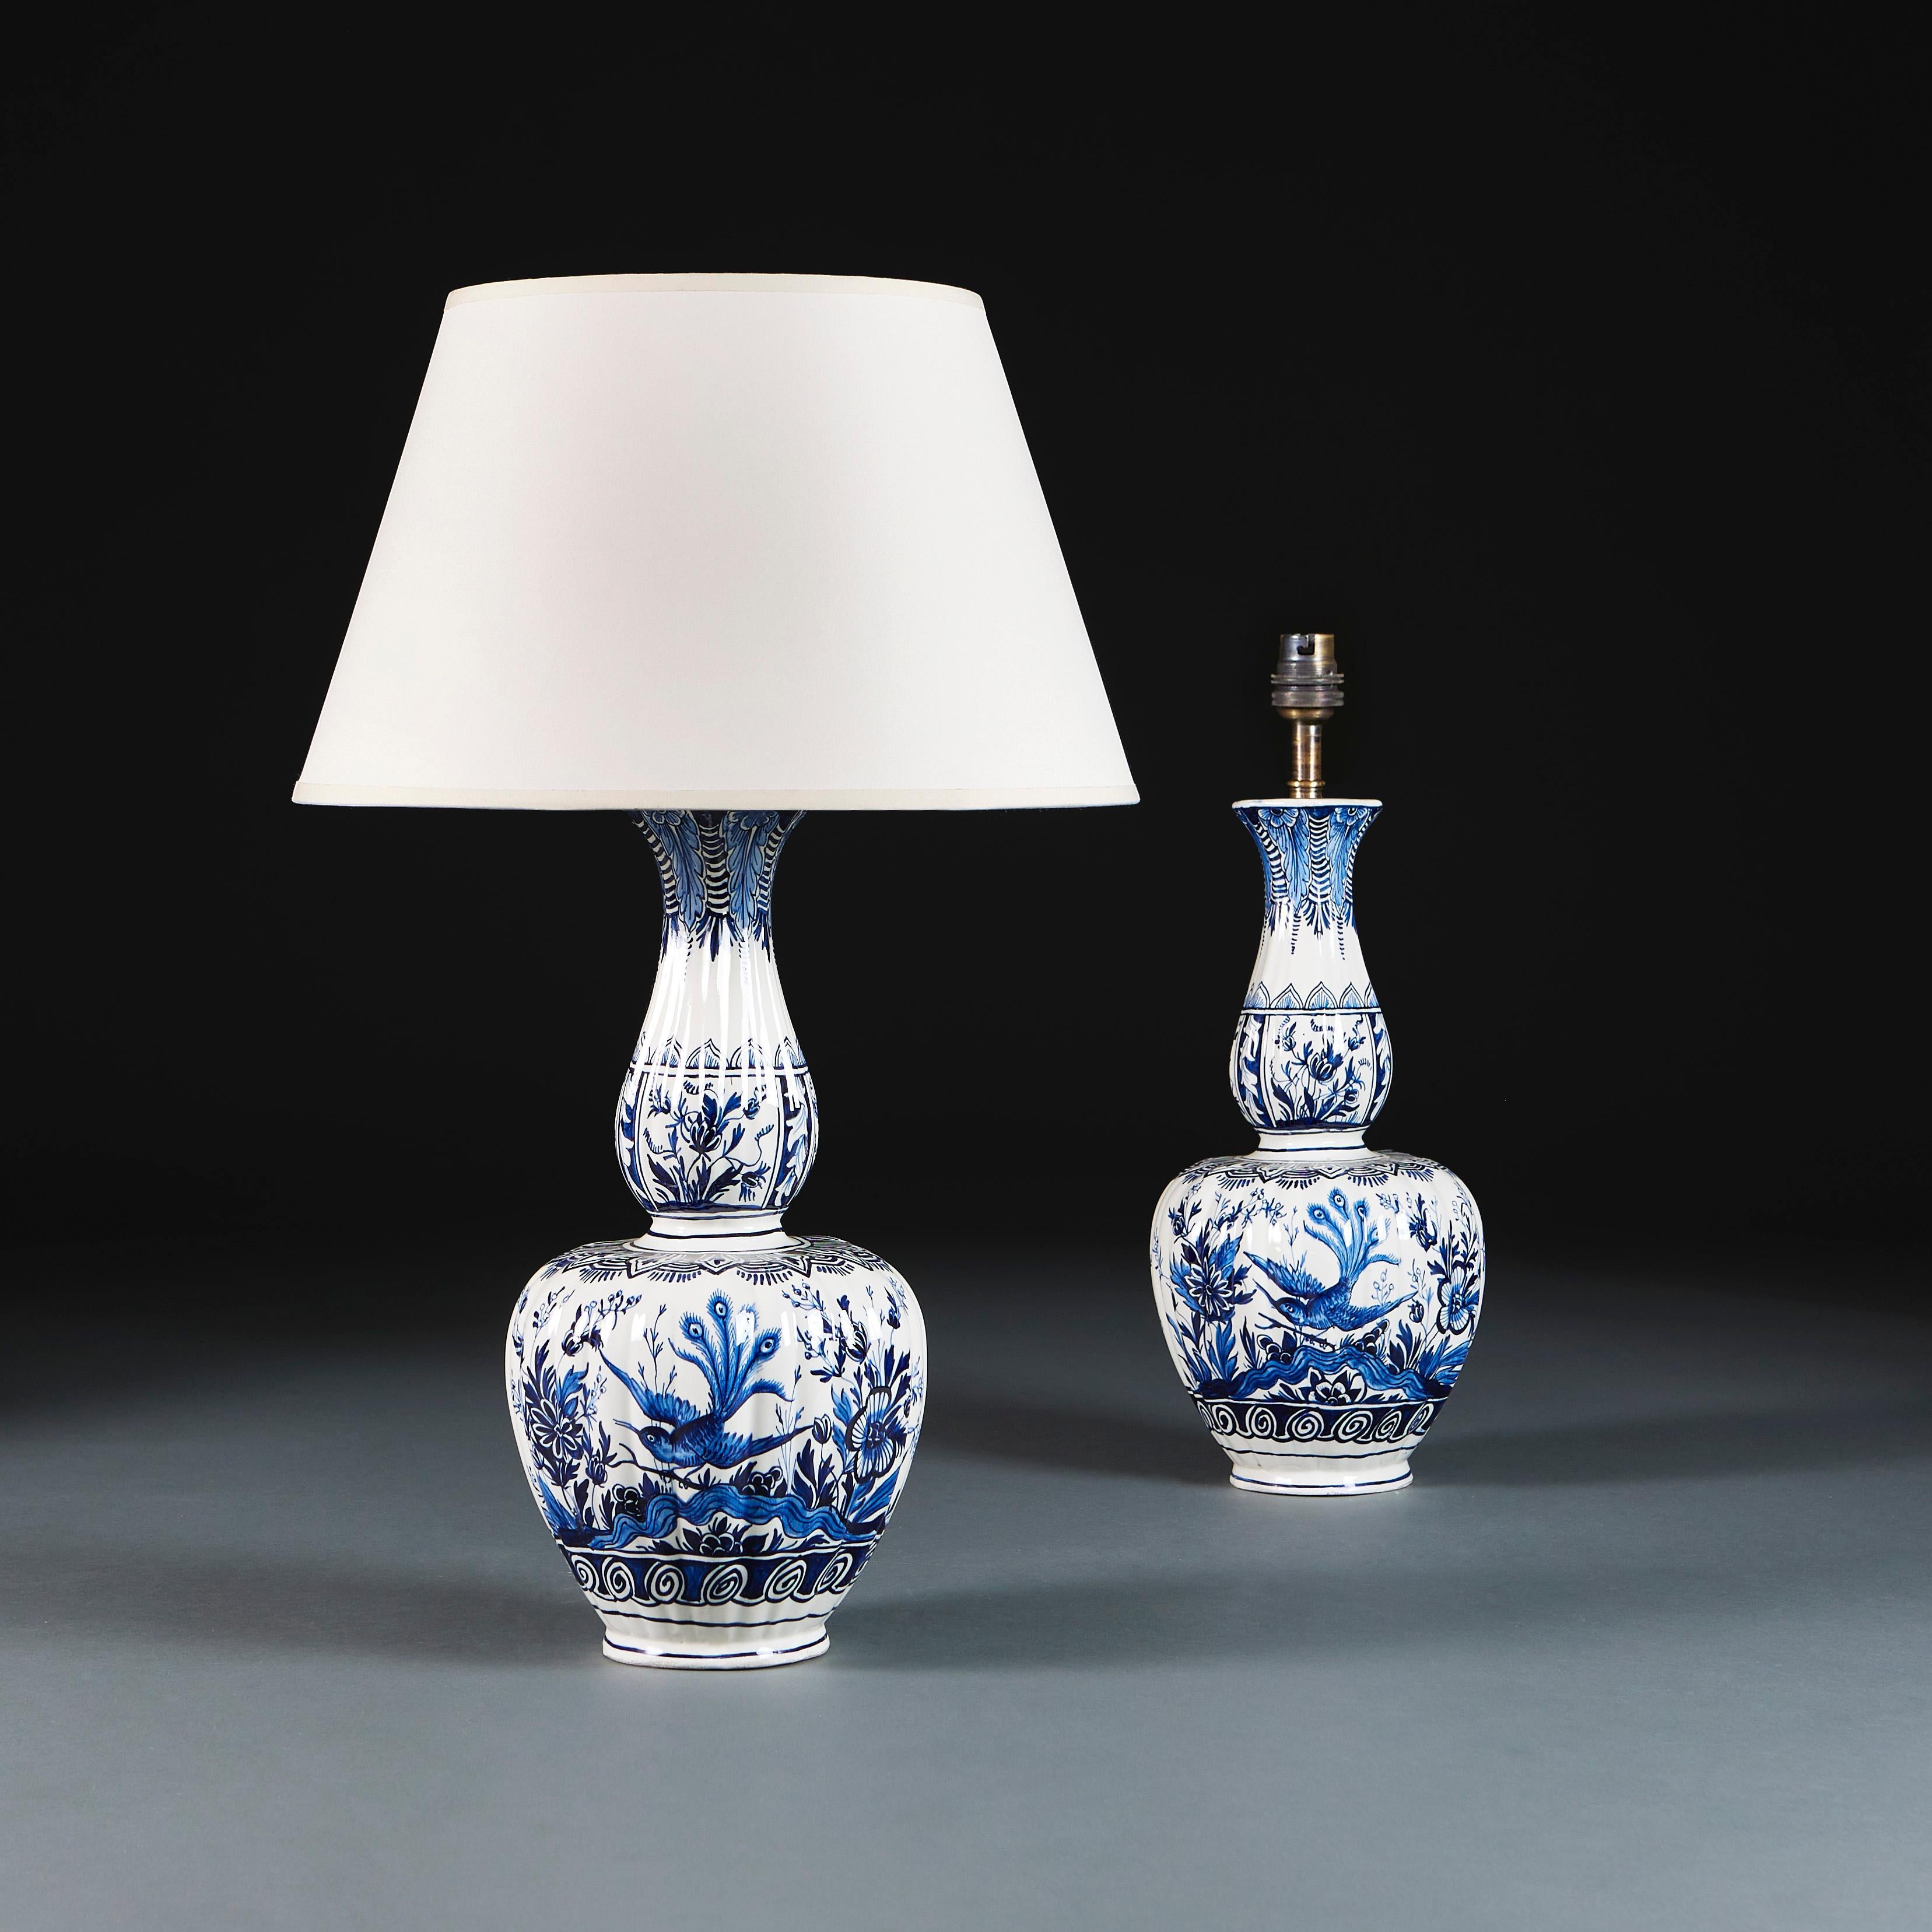 Low Countries, circa 1890

A pair of late nineteenth century blue and white Delft vases, of gadrooned double gourd form, decorated throughout with peacocks, tropical flora and scrolls, now converted as lamps.

Height 42.00cm
Height with shade